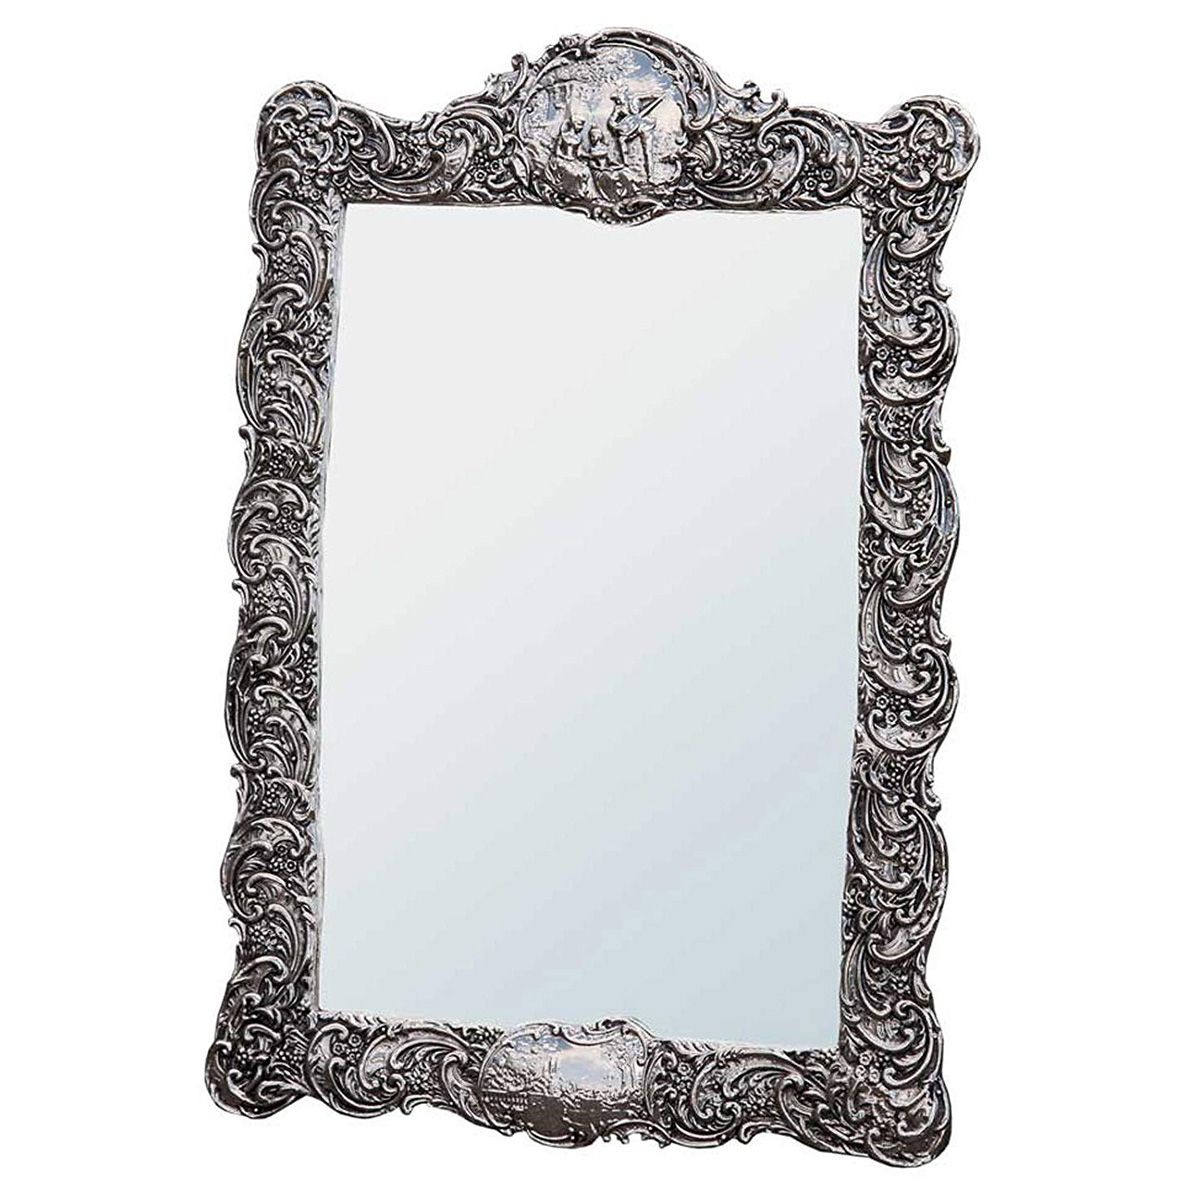 Ornate Silver Grey Finish Table Wall Mirror | Fizzy Fox Ripley For Steel Gray Wall Mirrors (View 5 of 15)